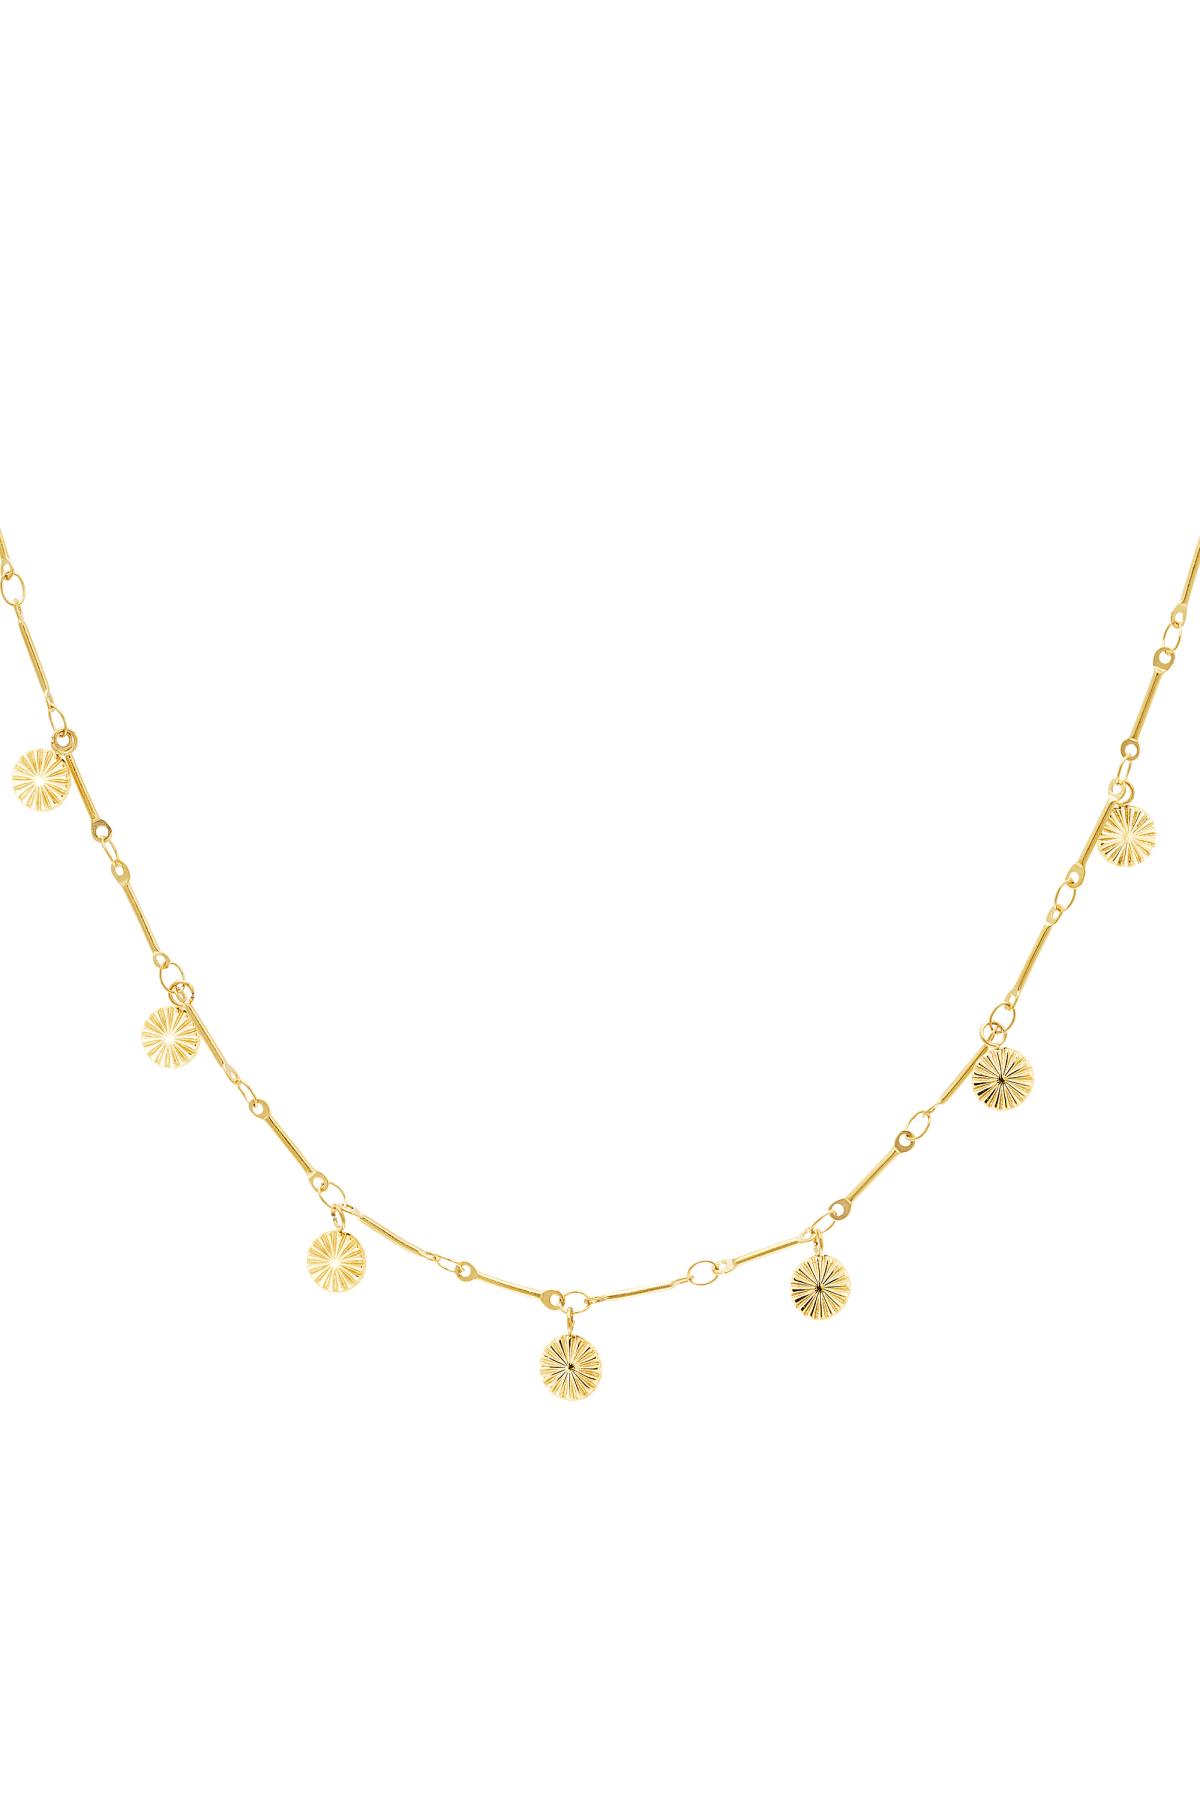 Collana con charms moneta fiore Gold Stainless Steel h5 